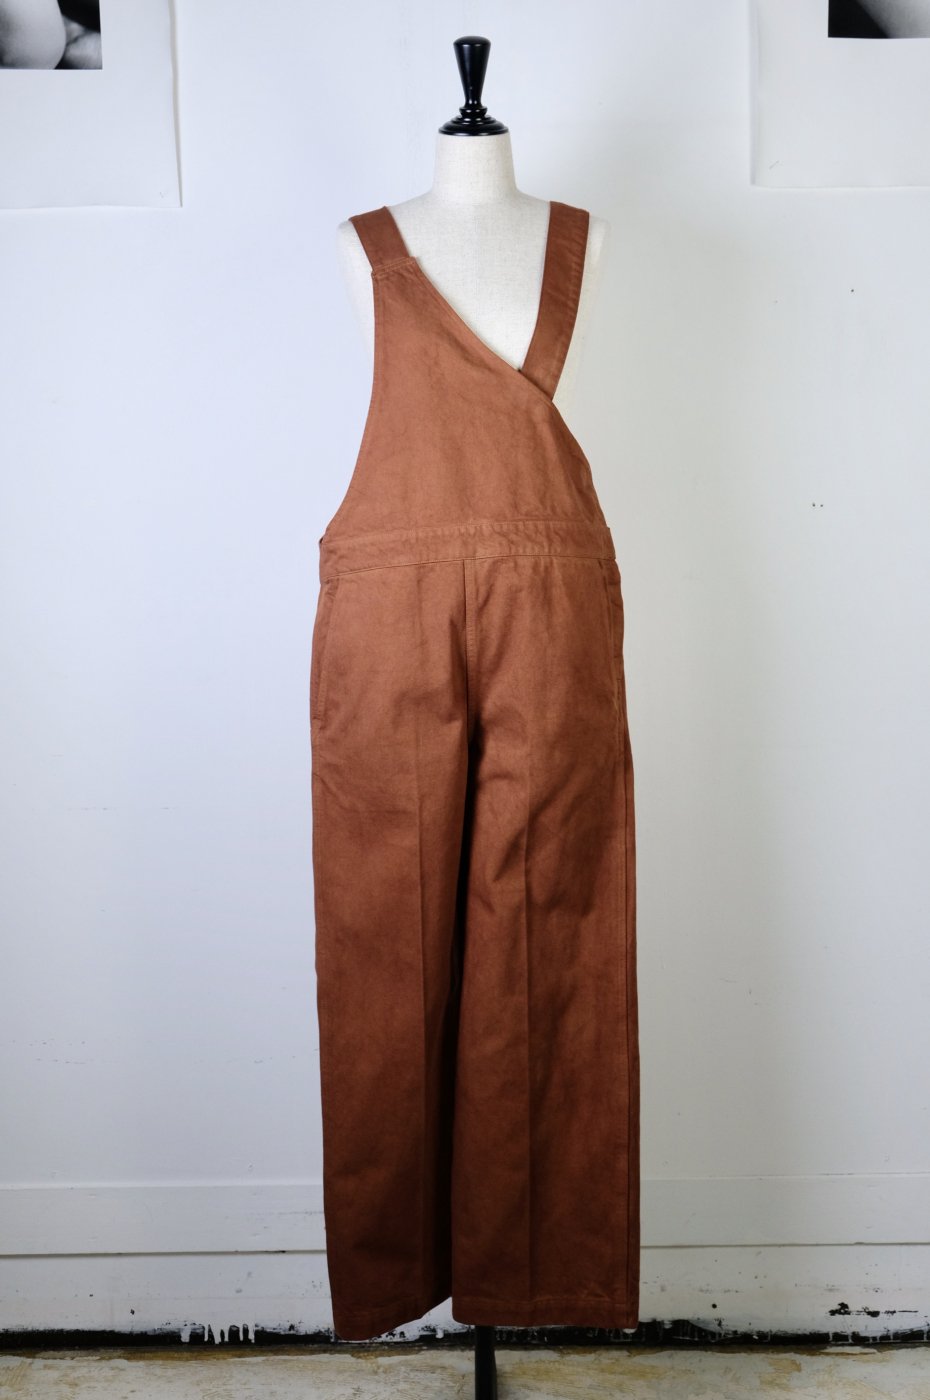 <img class='new_mark_img1' src='https://img.shop-pro.jp/img/new/icons8.gif' style='border:none;display:inline;margin:0px;padding:0px;width:auto;' />CURRENTAGE-COLOR DENIM ONE SHOULDER OVERALLS-BROWN